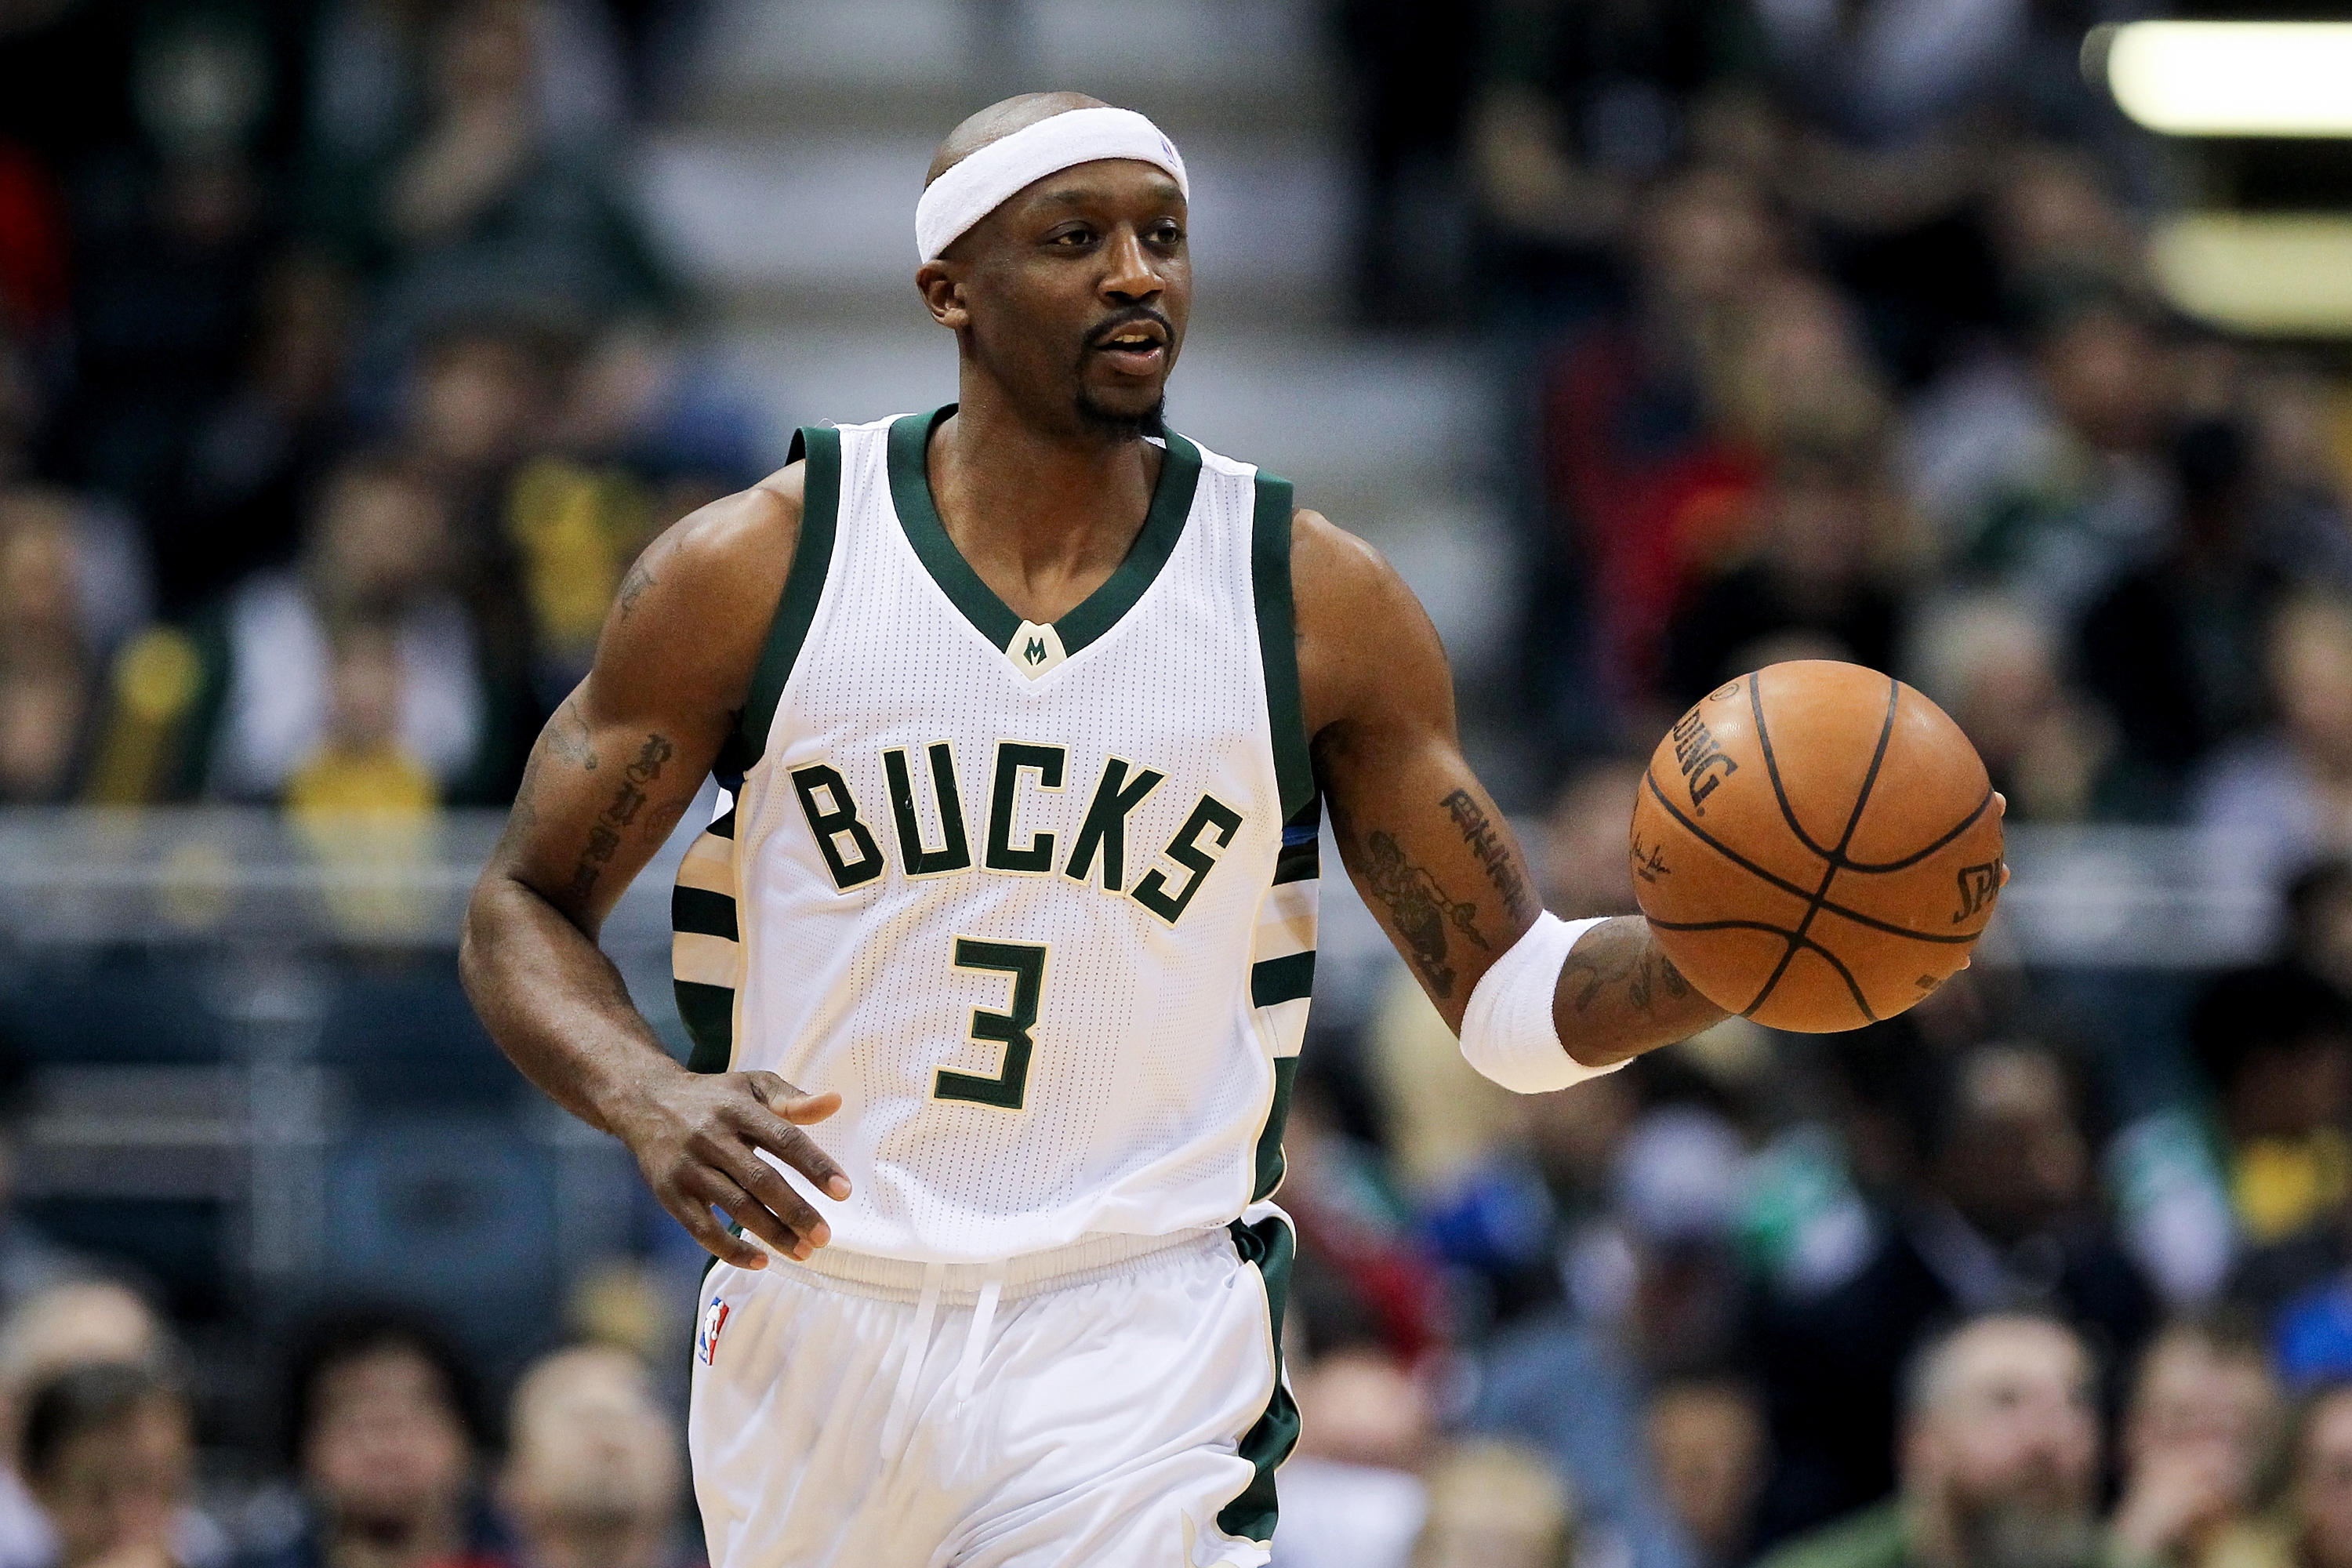 Arizona's Jason Terry reportedly 'part of Mavs group' at NBA summer league,  attends clinic